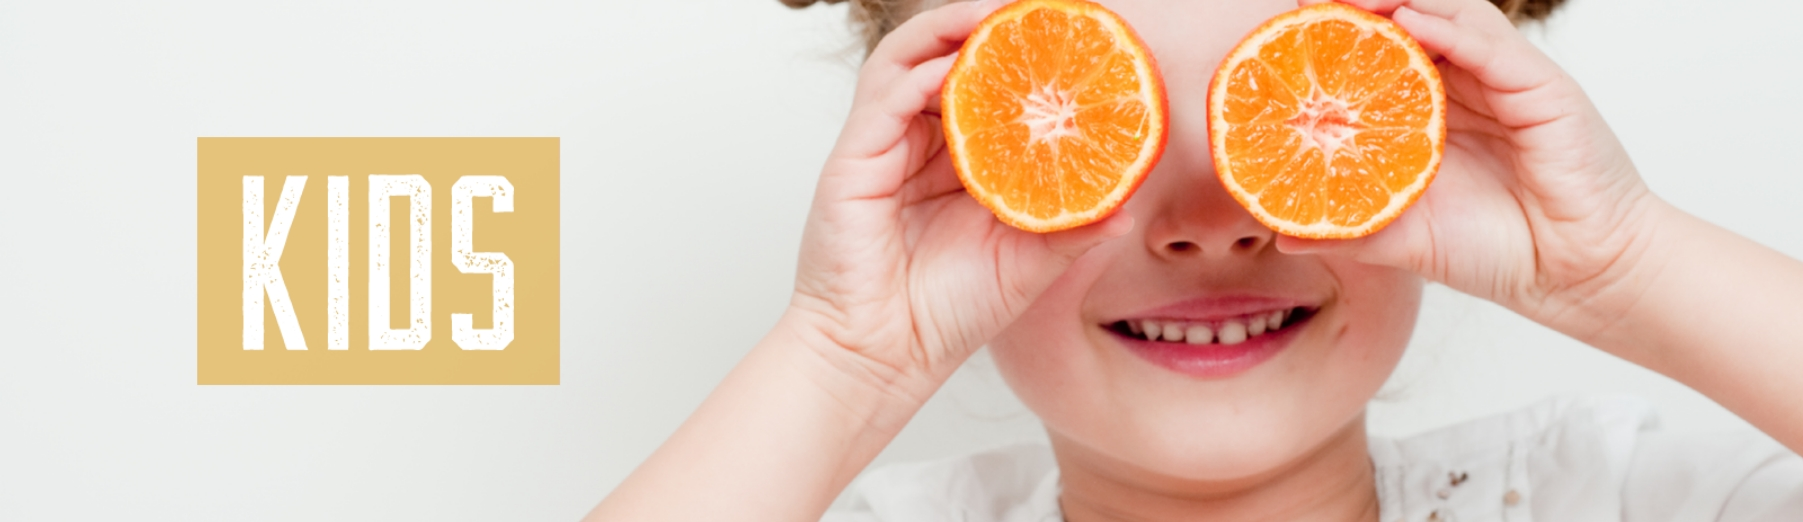 kid with oranges for eyes header 